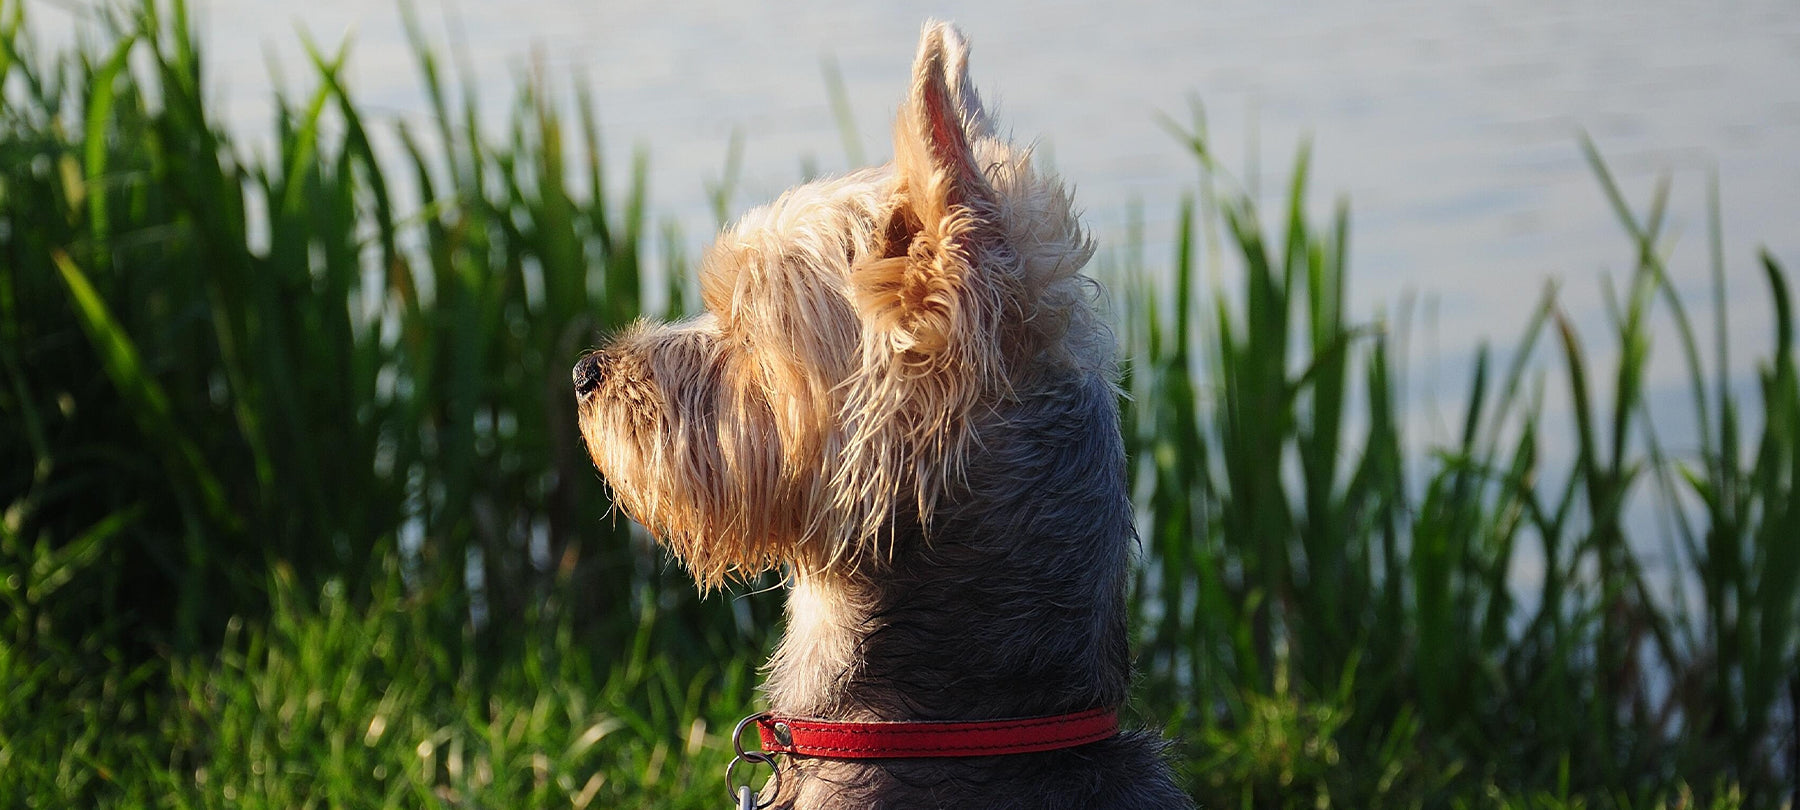 A Yorkie looking off into the distance, sitting outside in the grass.